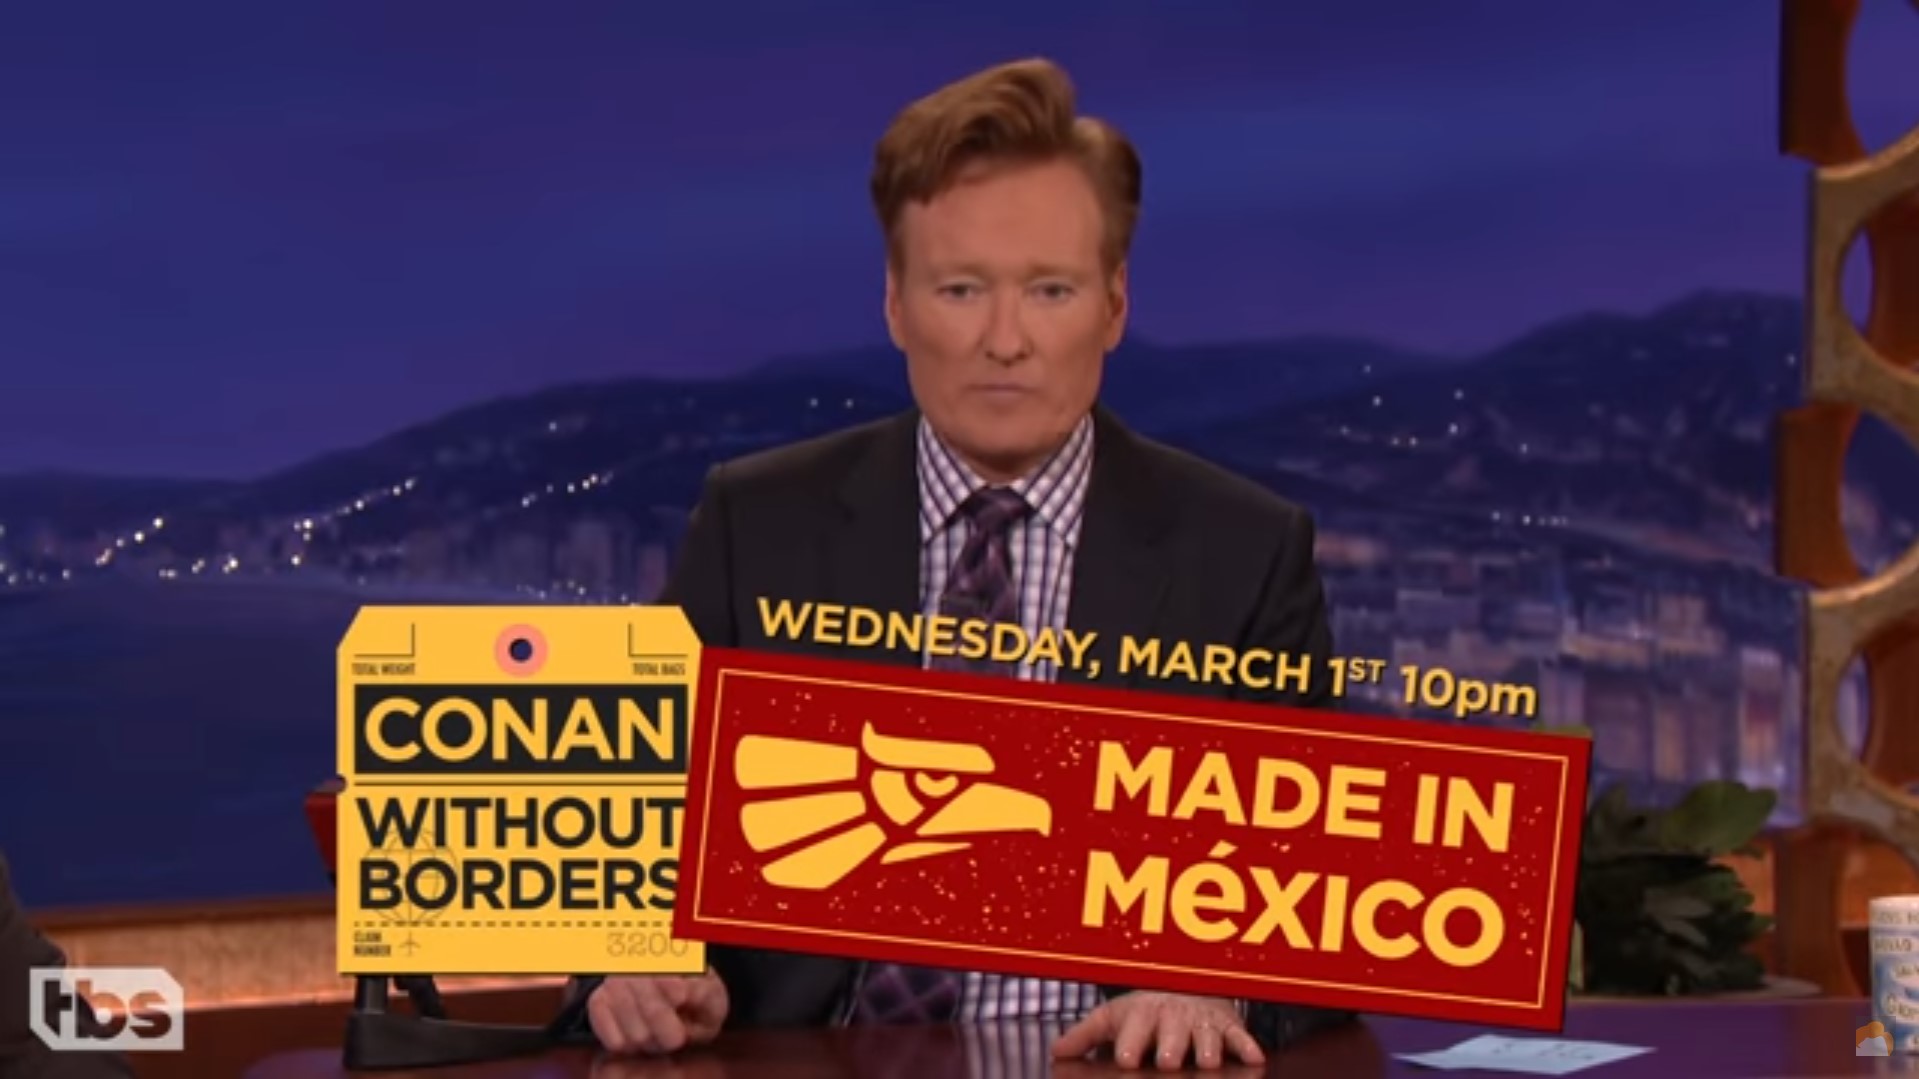 Conan Without Borders: Made In Mexico